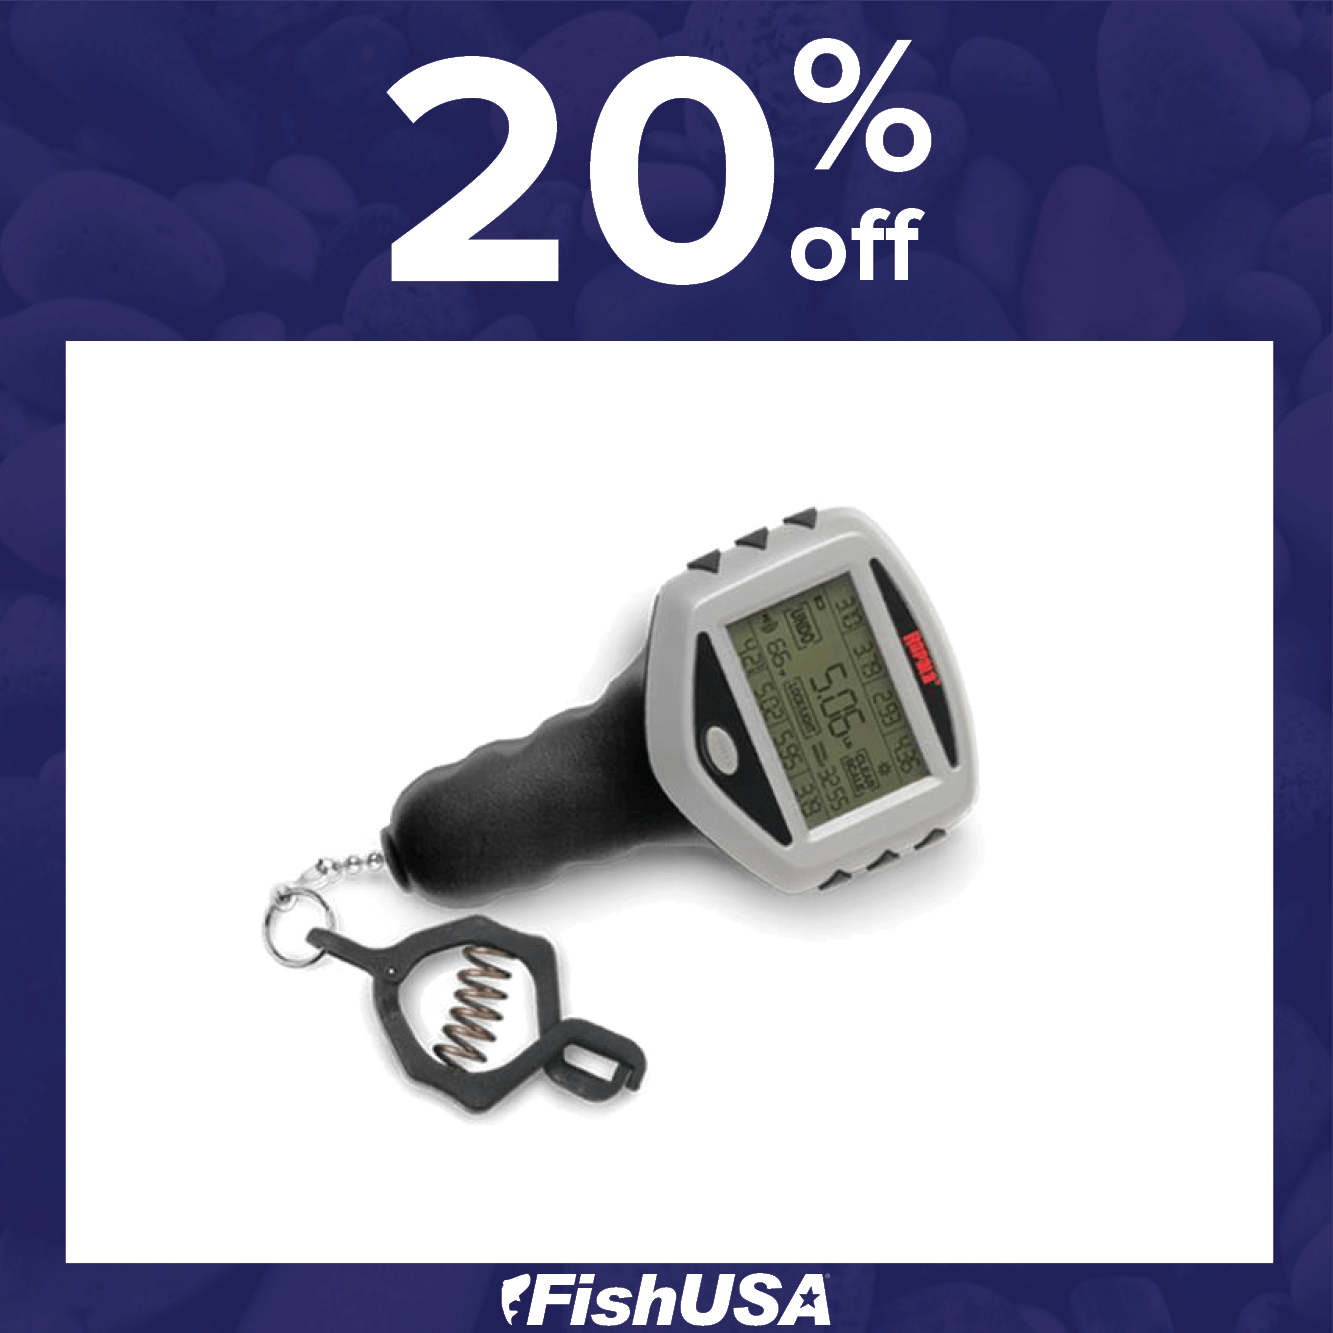 Save 20% on the Rapala Touch Screen Digital Fish Scale